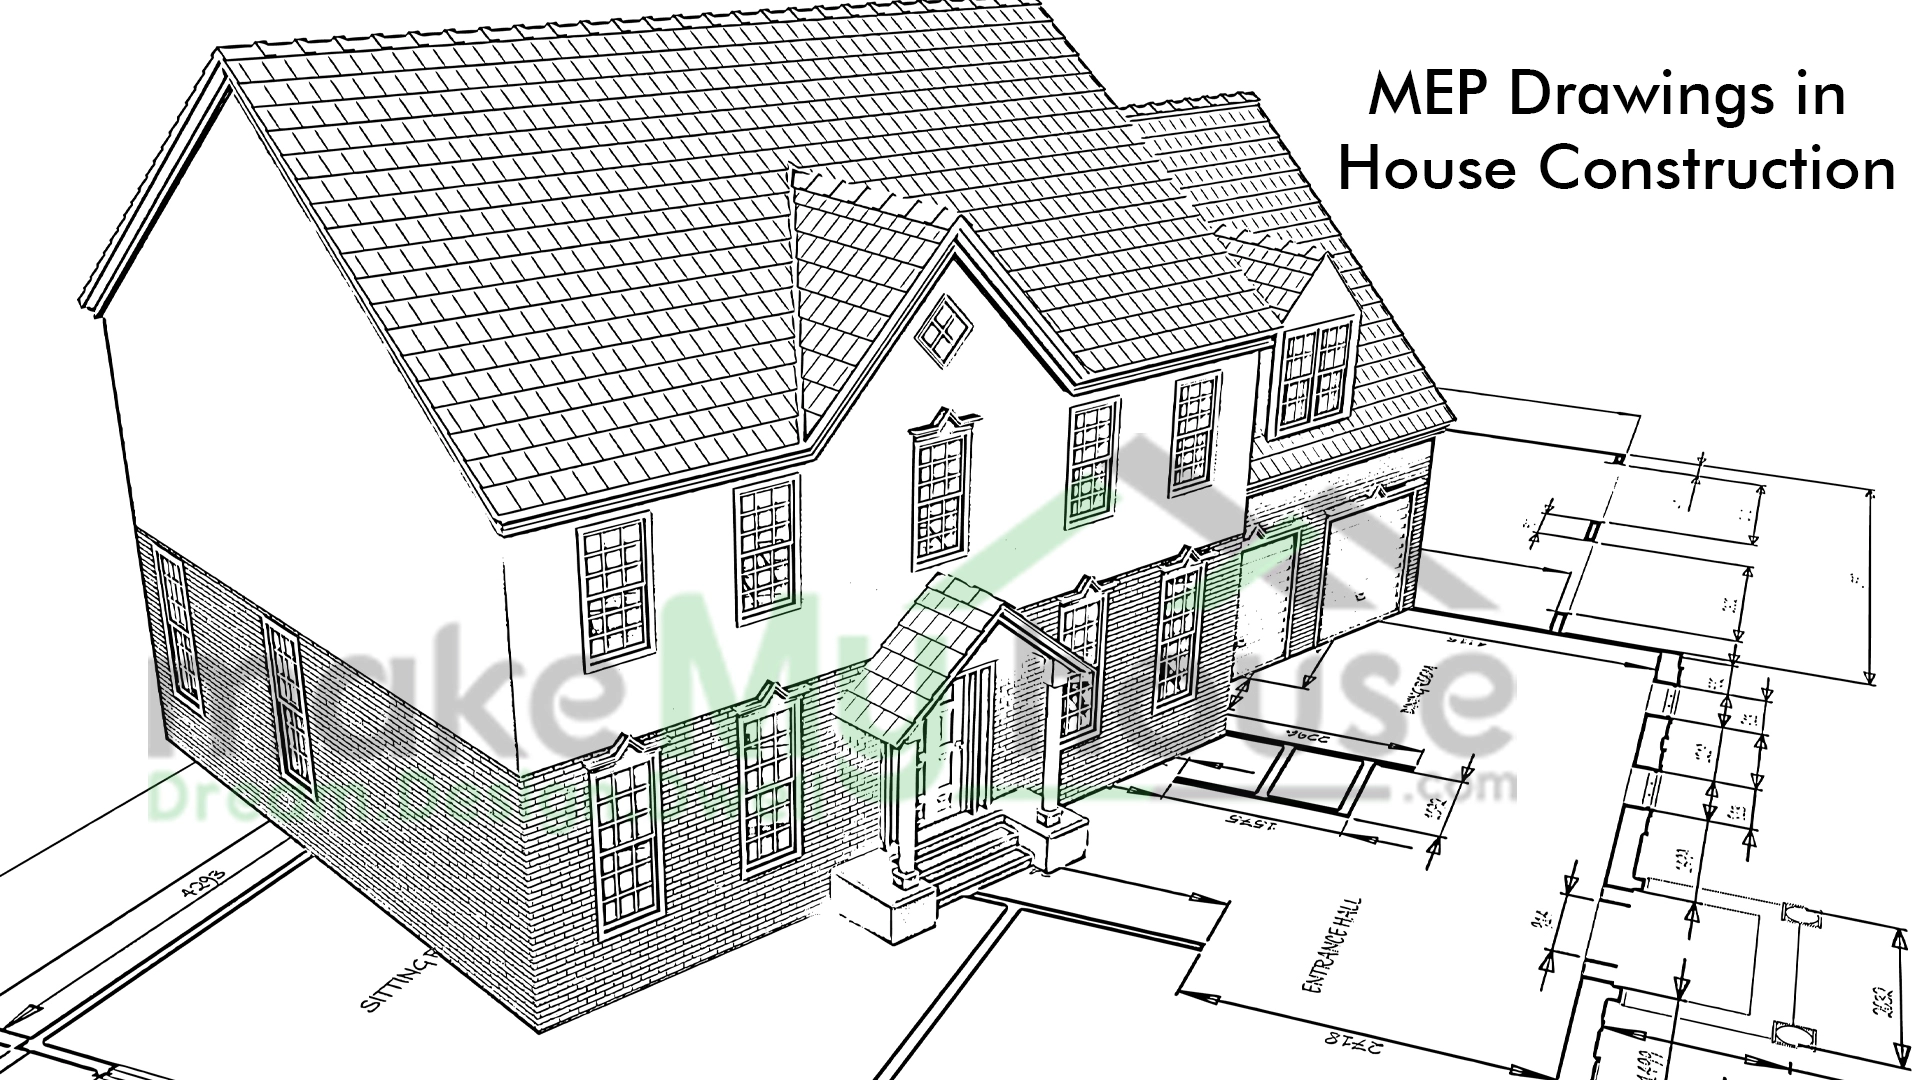 MEP Drawings in House Construction